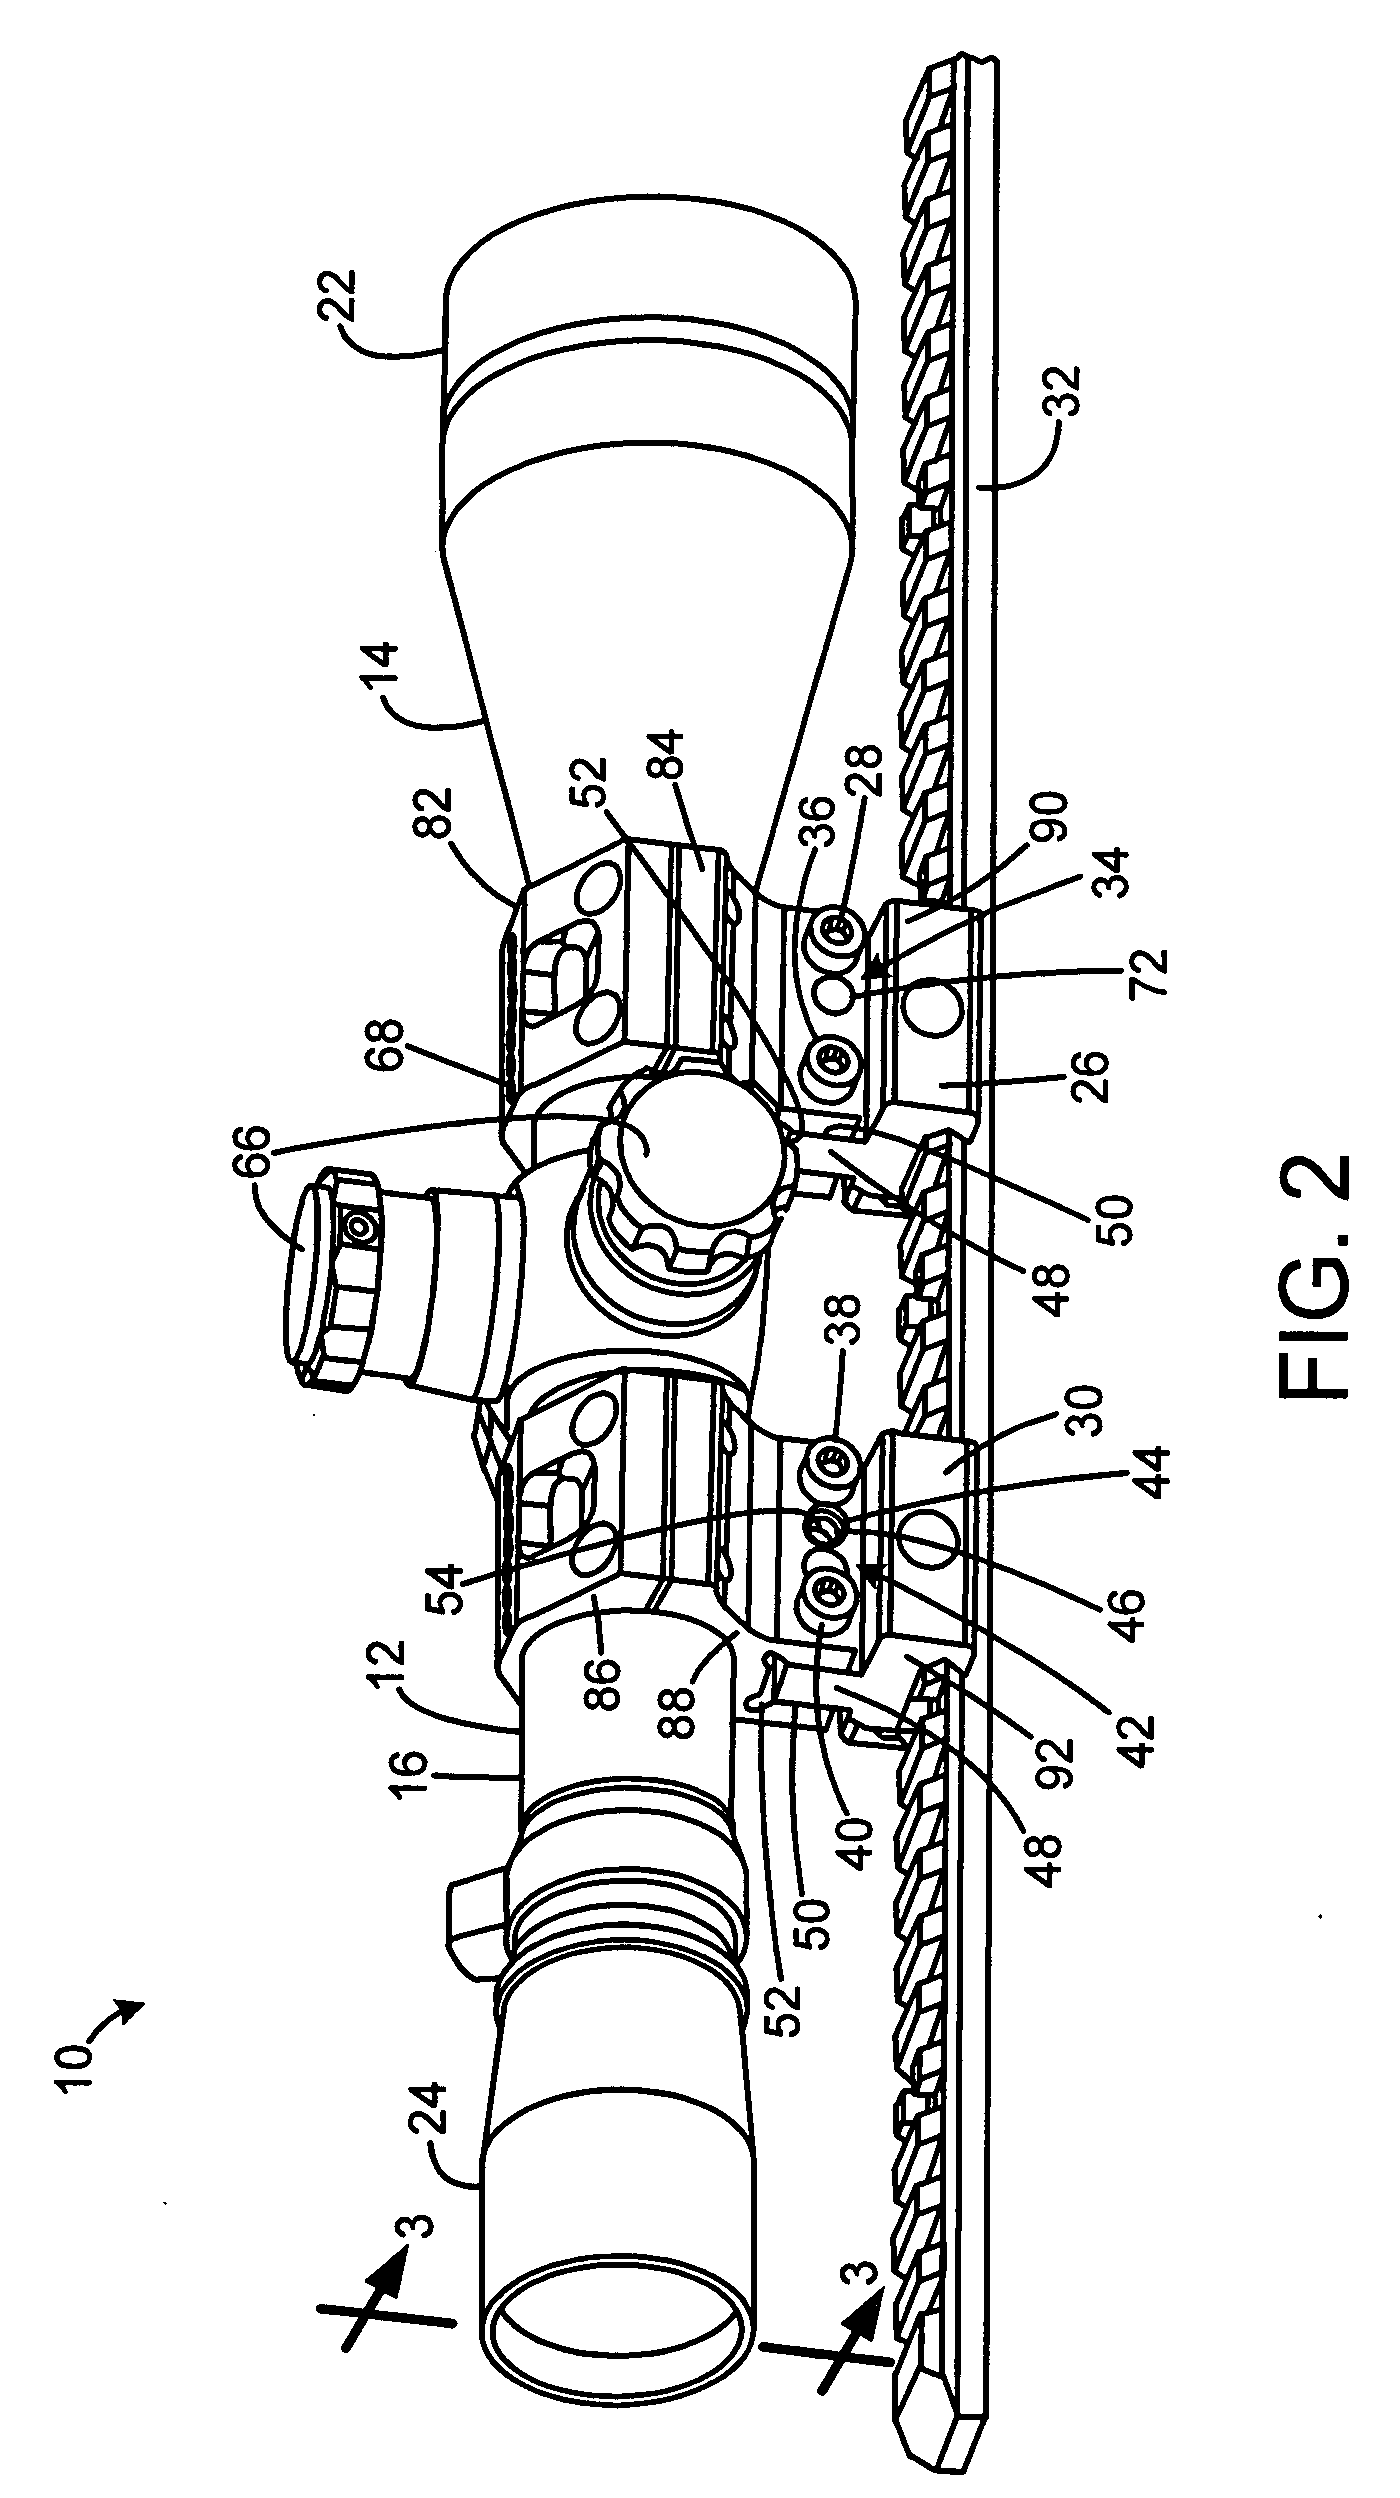 Adjustable rifle telescope system with multiple fixed angle mount setpoints